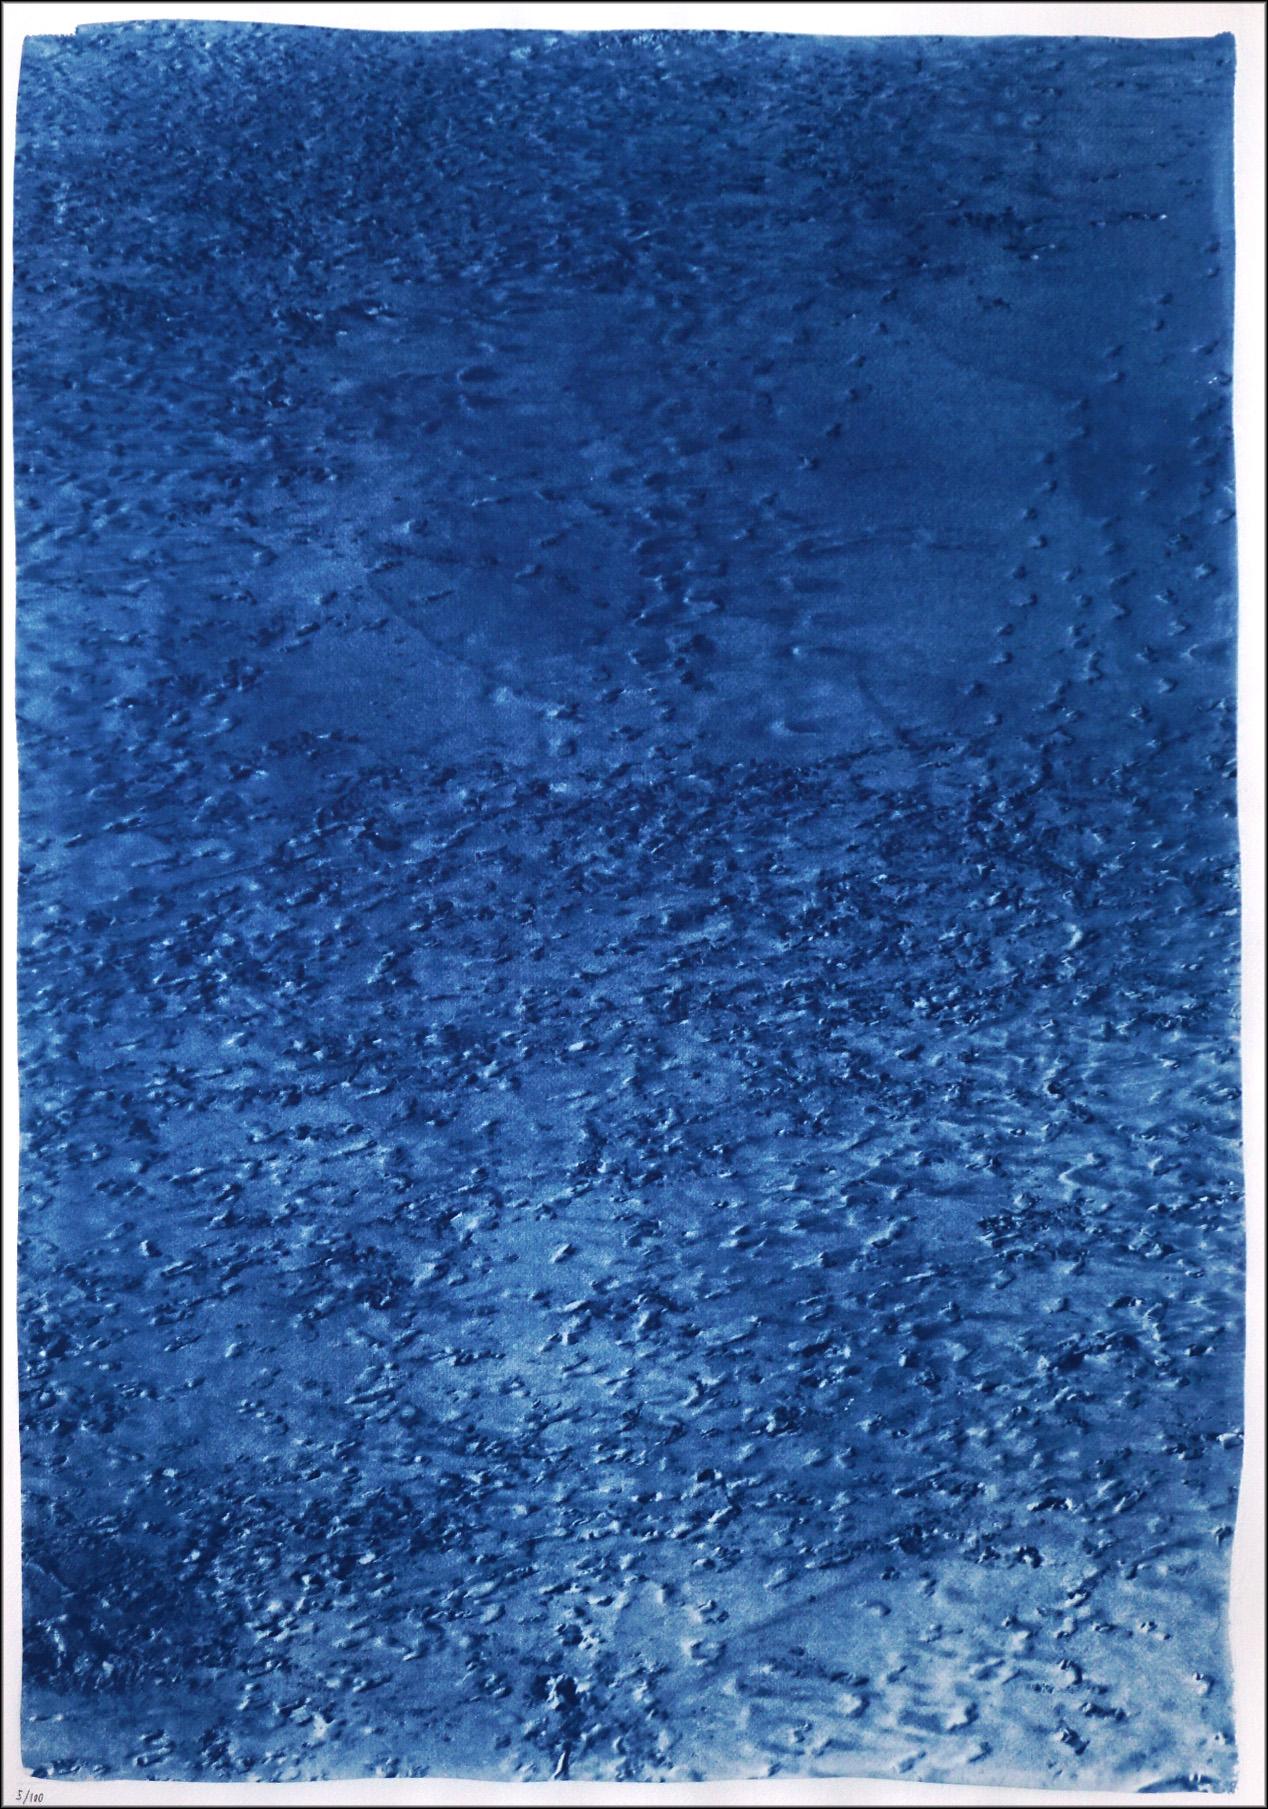 This is an exclusive handprinted limited edition cyanotype.

This beautiful triptych shows a smooth wave peacefully reaching the shore in Costa Rica.

Details:
+ Title: Calm Costa Rica Shore
+ Year: 2022
+ Edition Size: 100
+ Stamped and Certificate